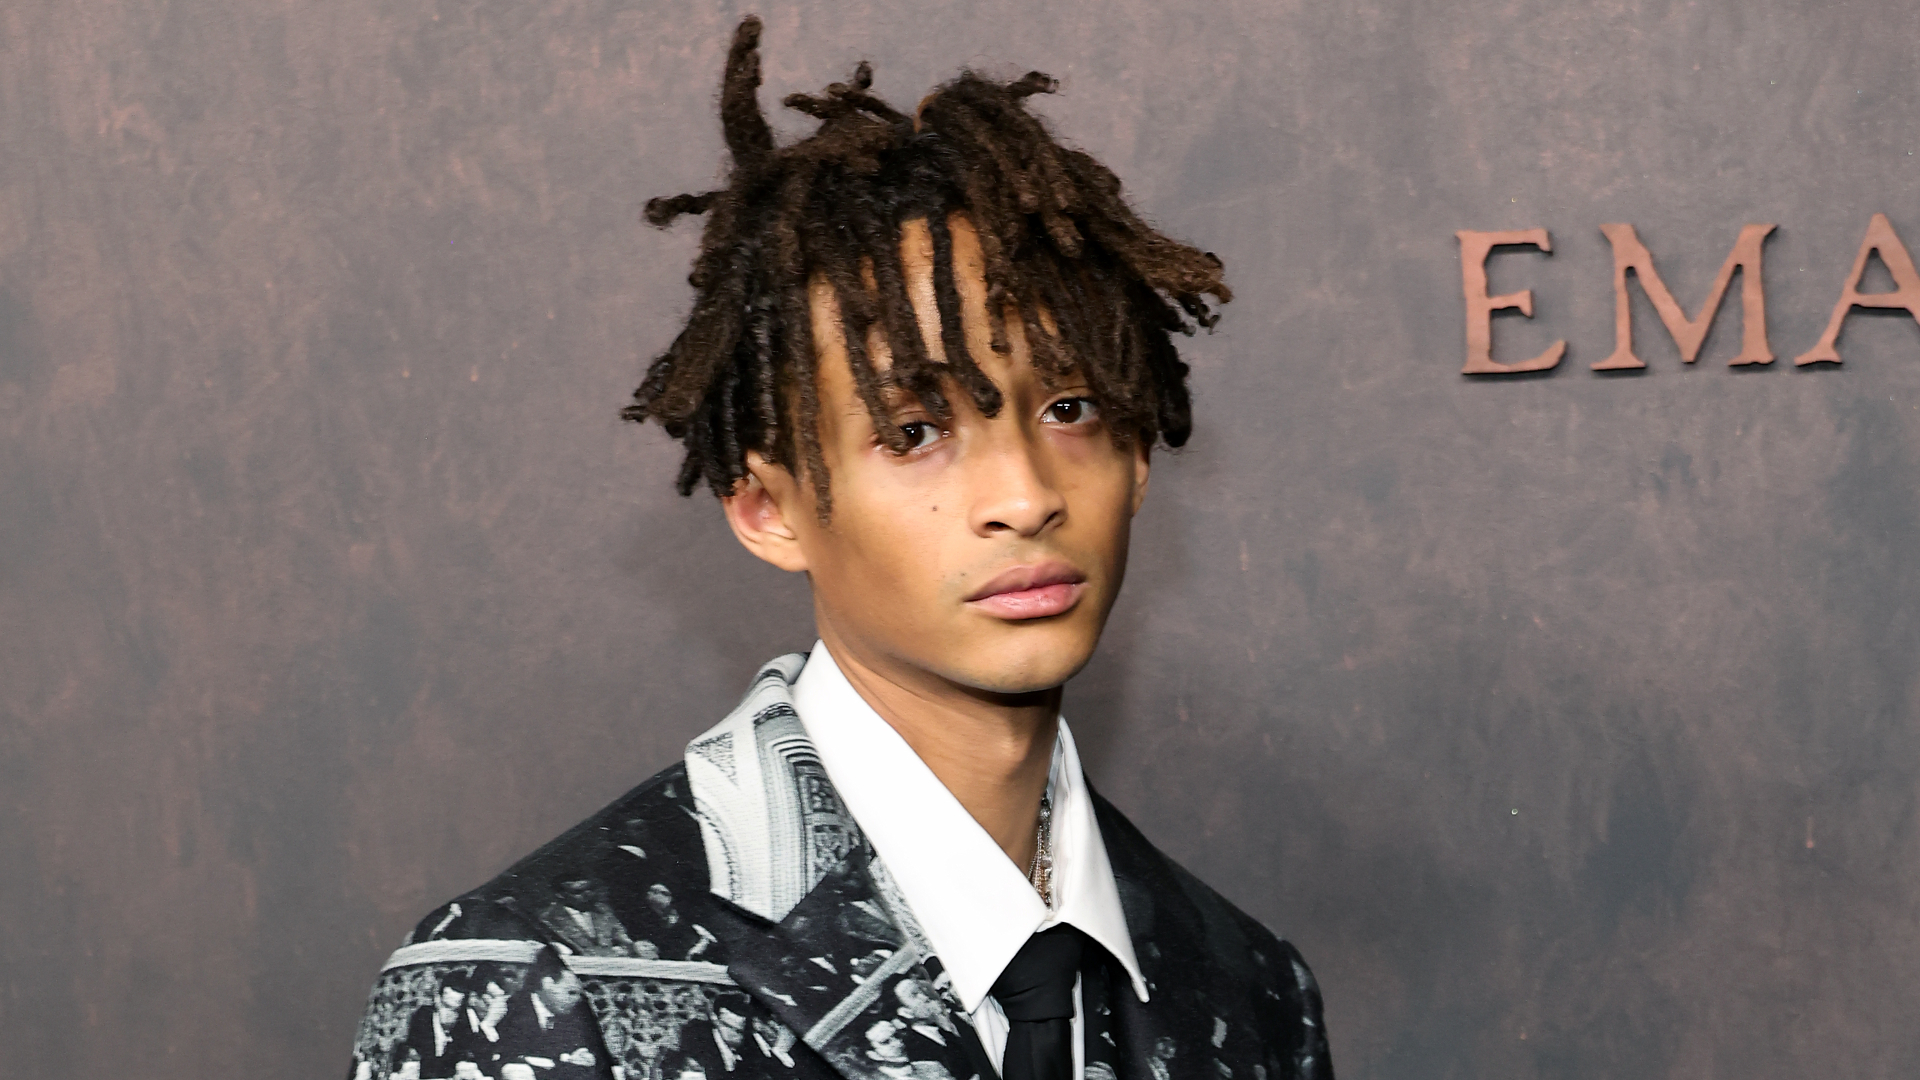 Nepo-baby's troubled existence: What became of Jaden Smith